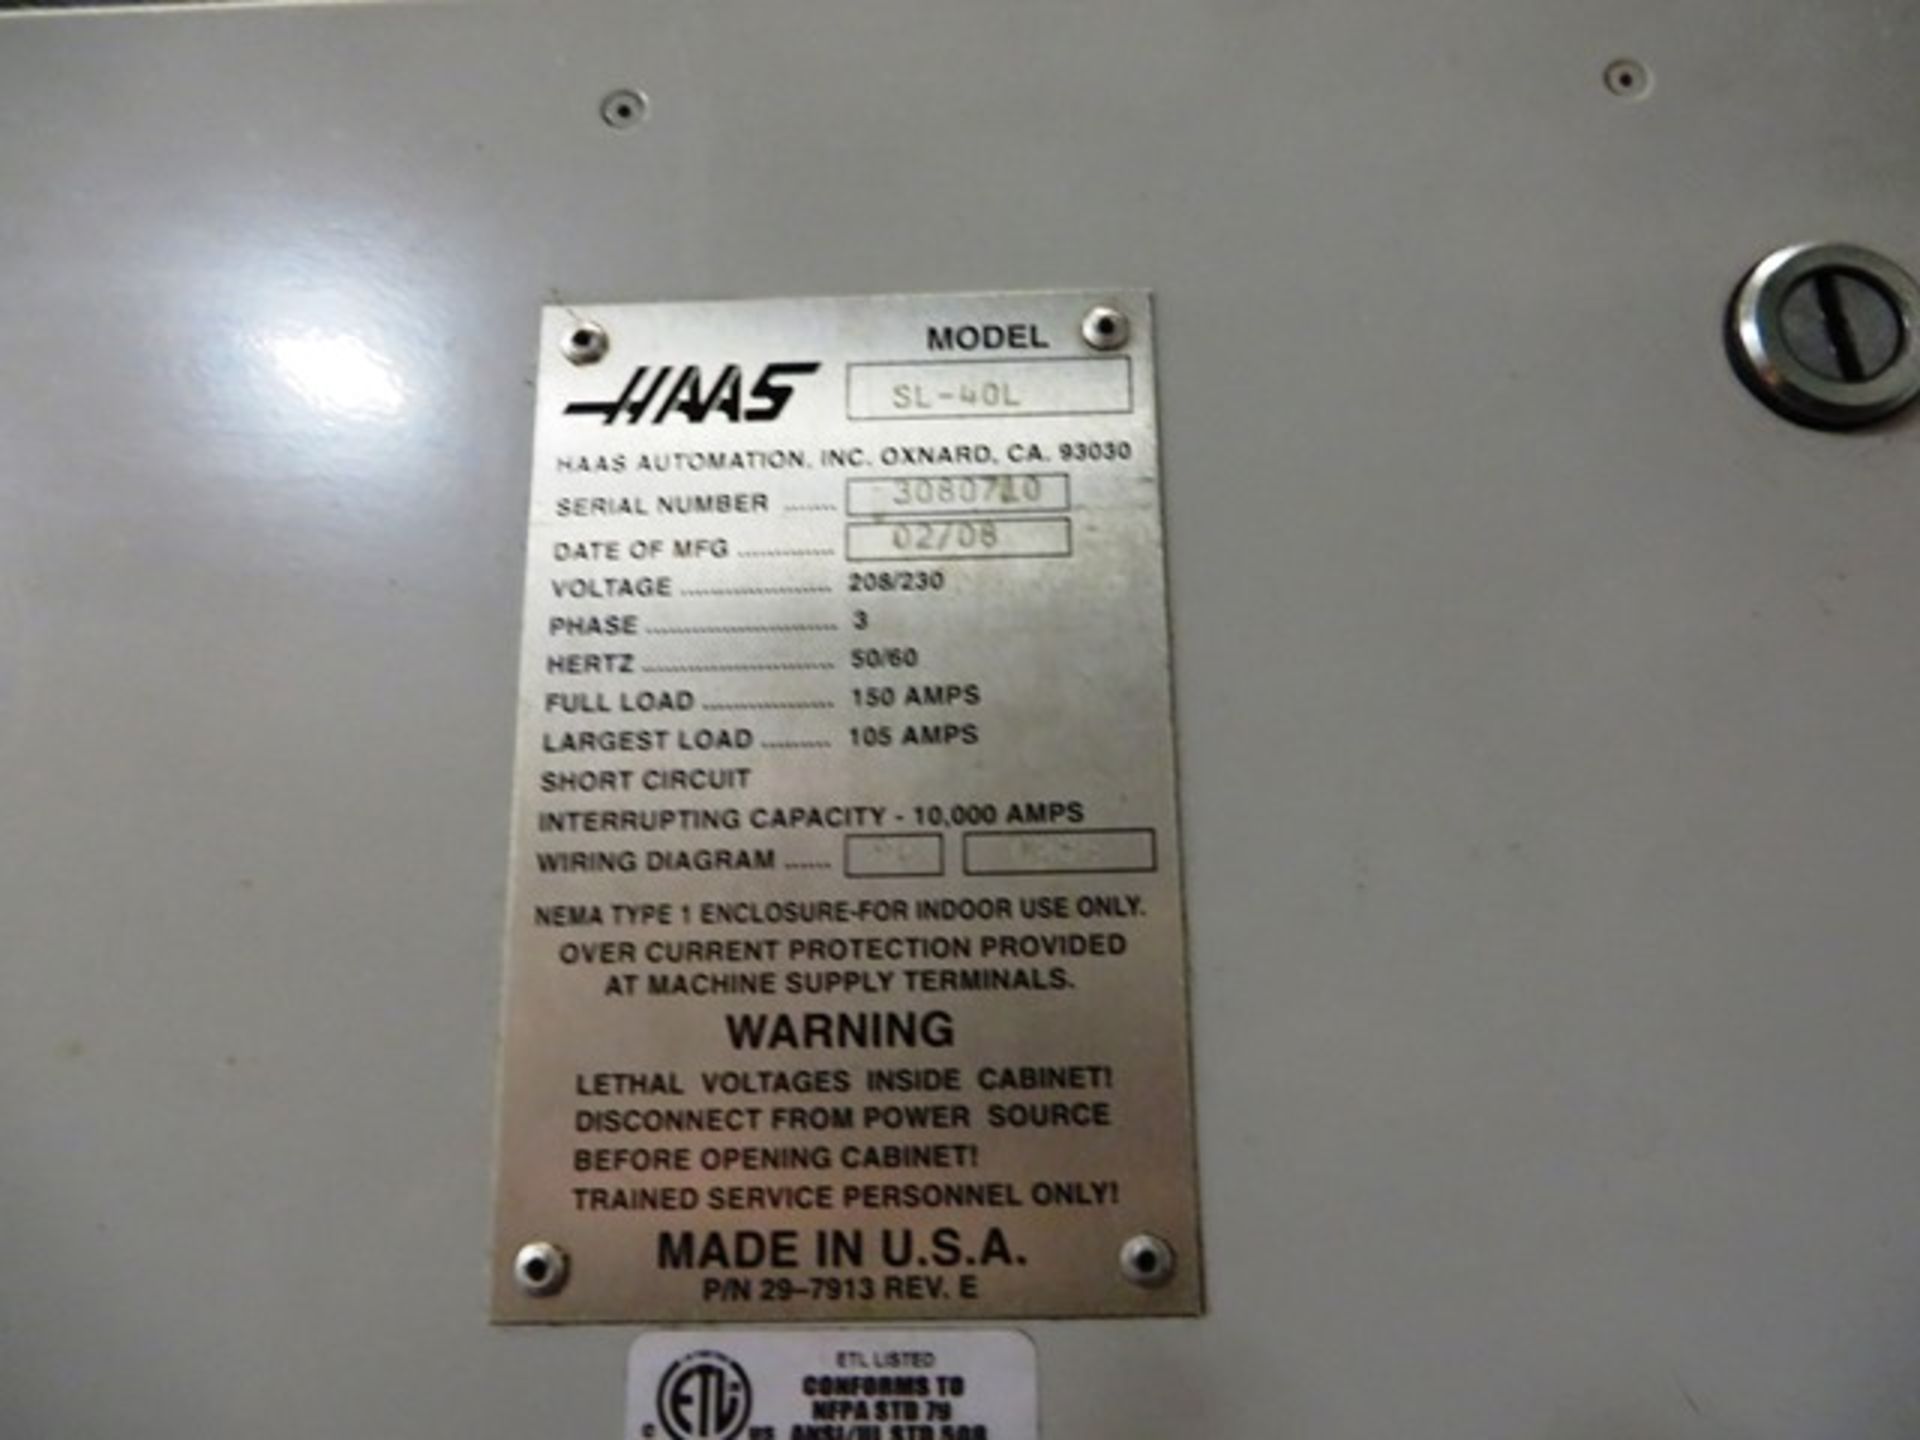 2008 Haas Model SL-40L CNC Turning Center - Image 6 of 6